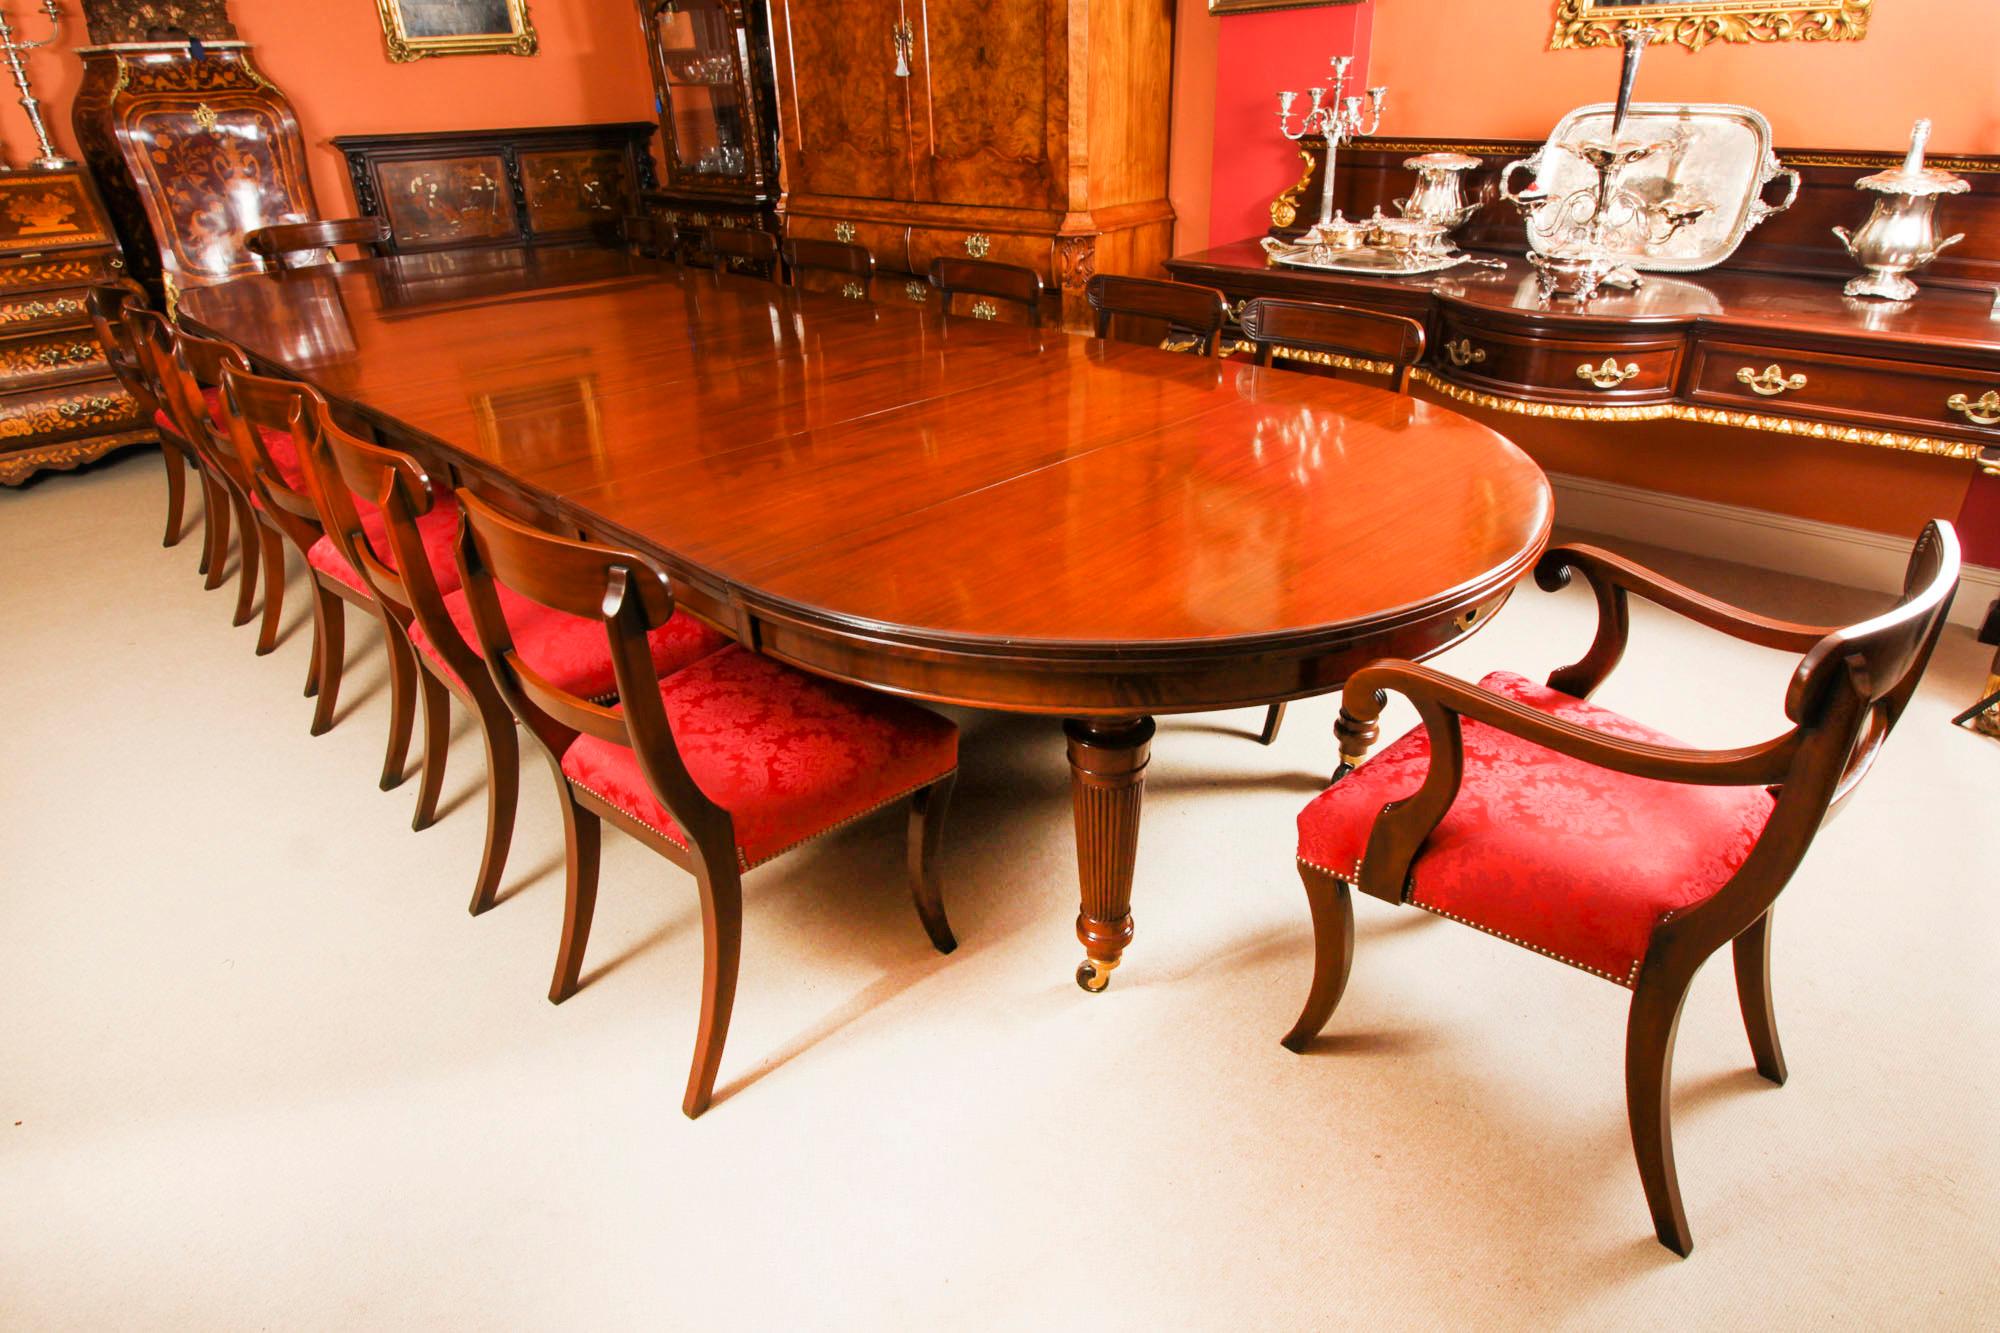 Late Victorian Antique 15ft Flame Mahogany Extending Dining Table by Edwards & Roberts 19C